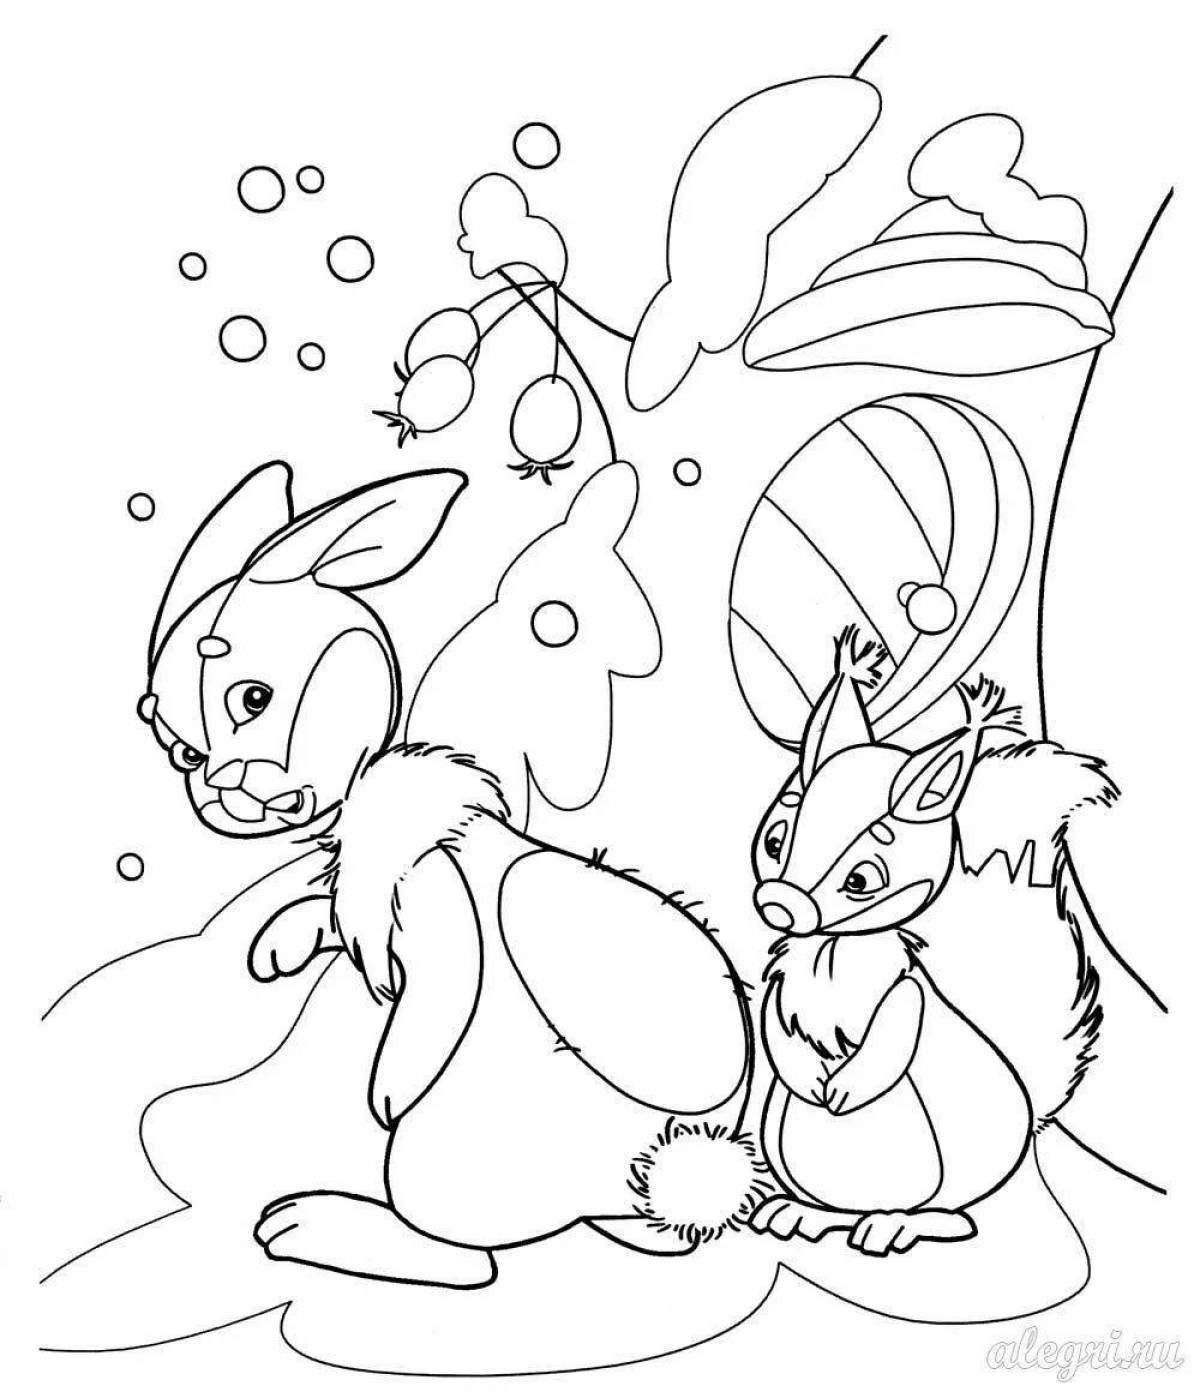 Shiny winter squirrel coloring page